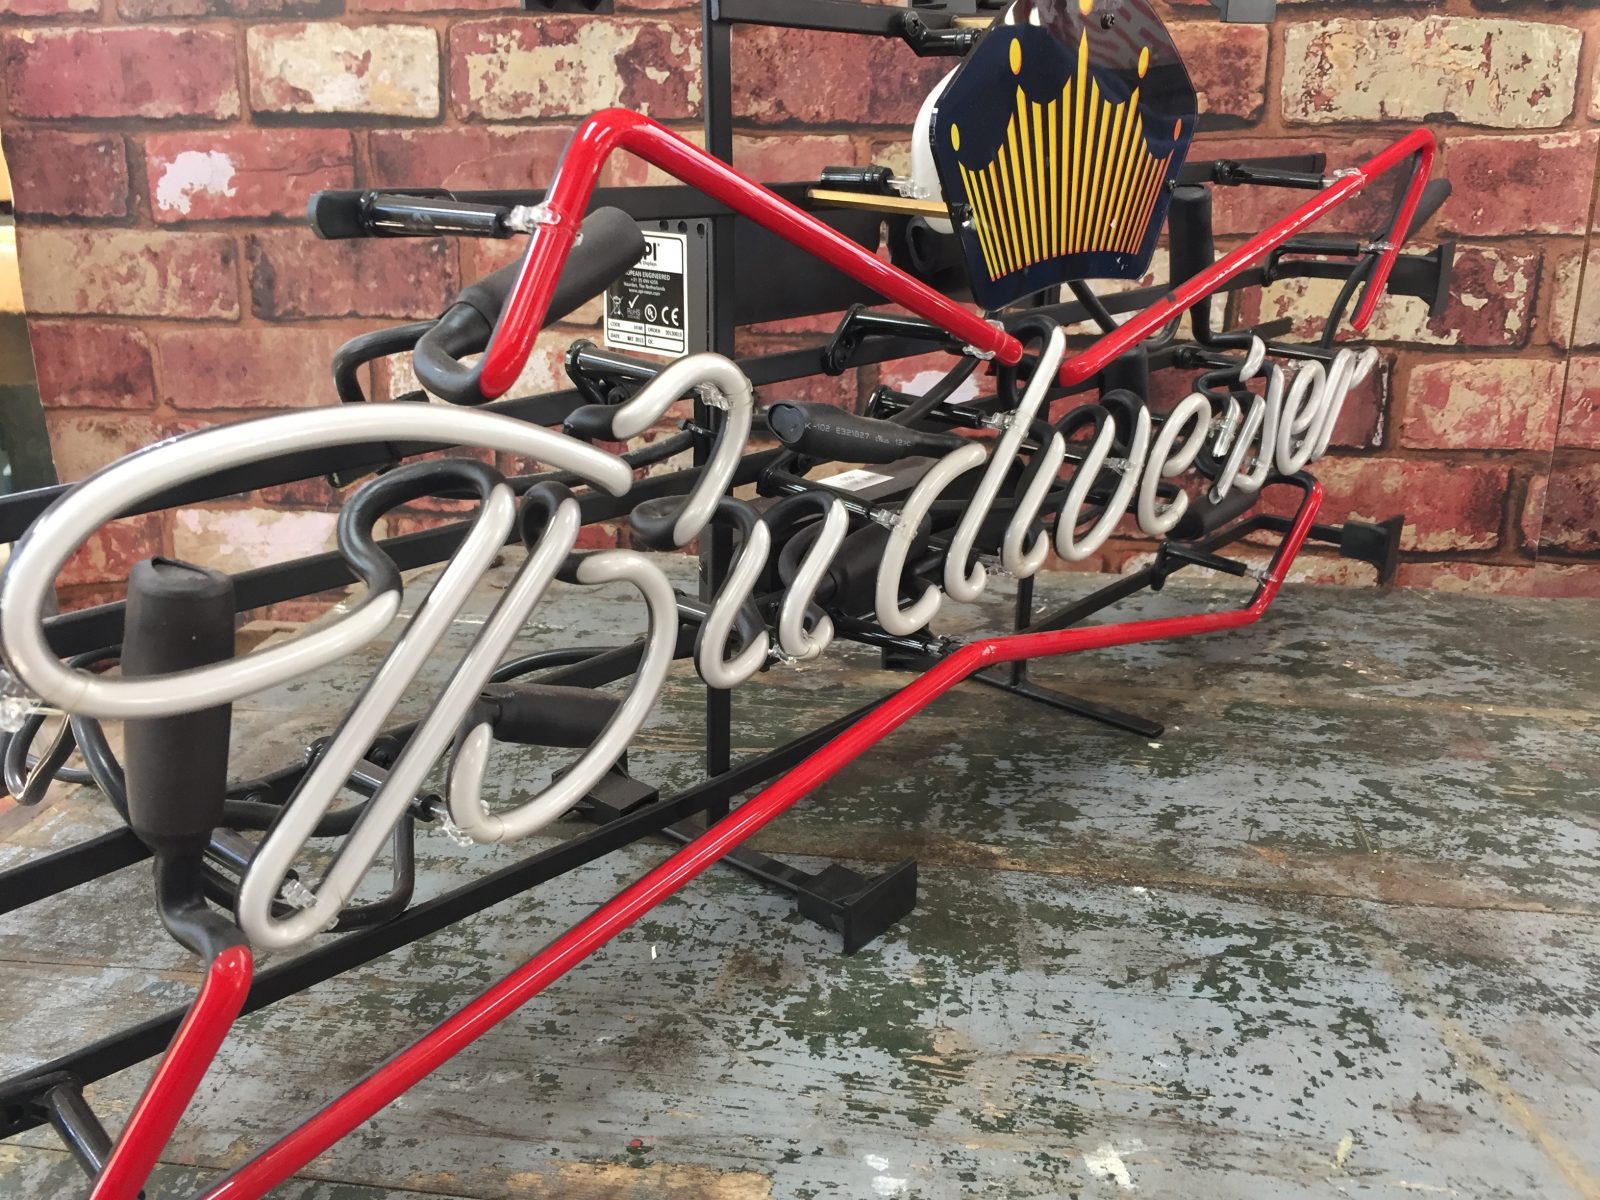 Classic collectible neon Budweiser advertising light man cave